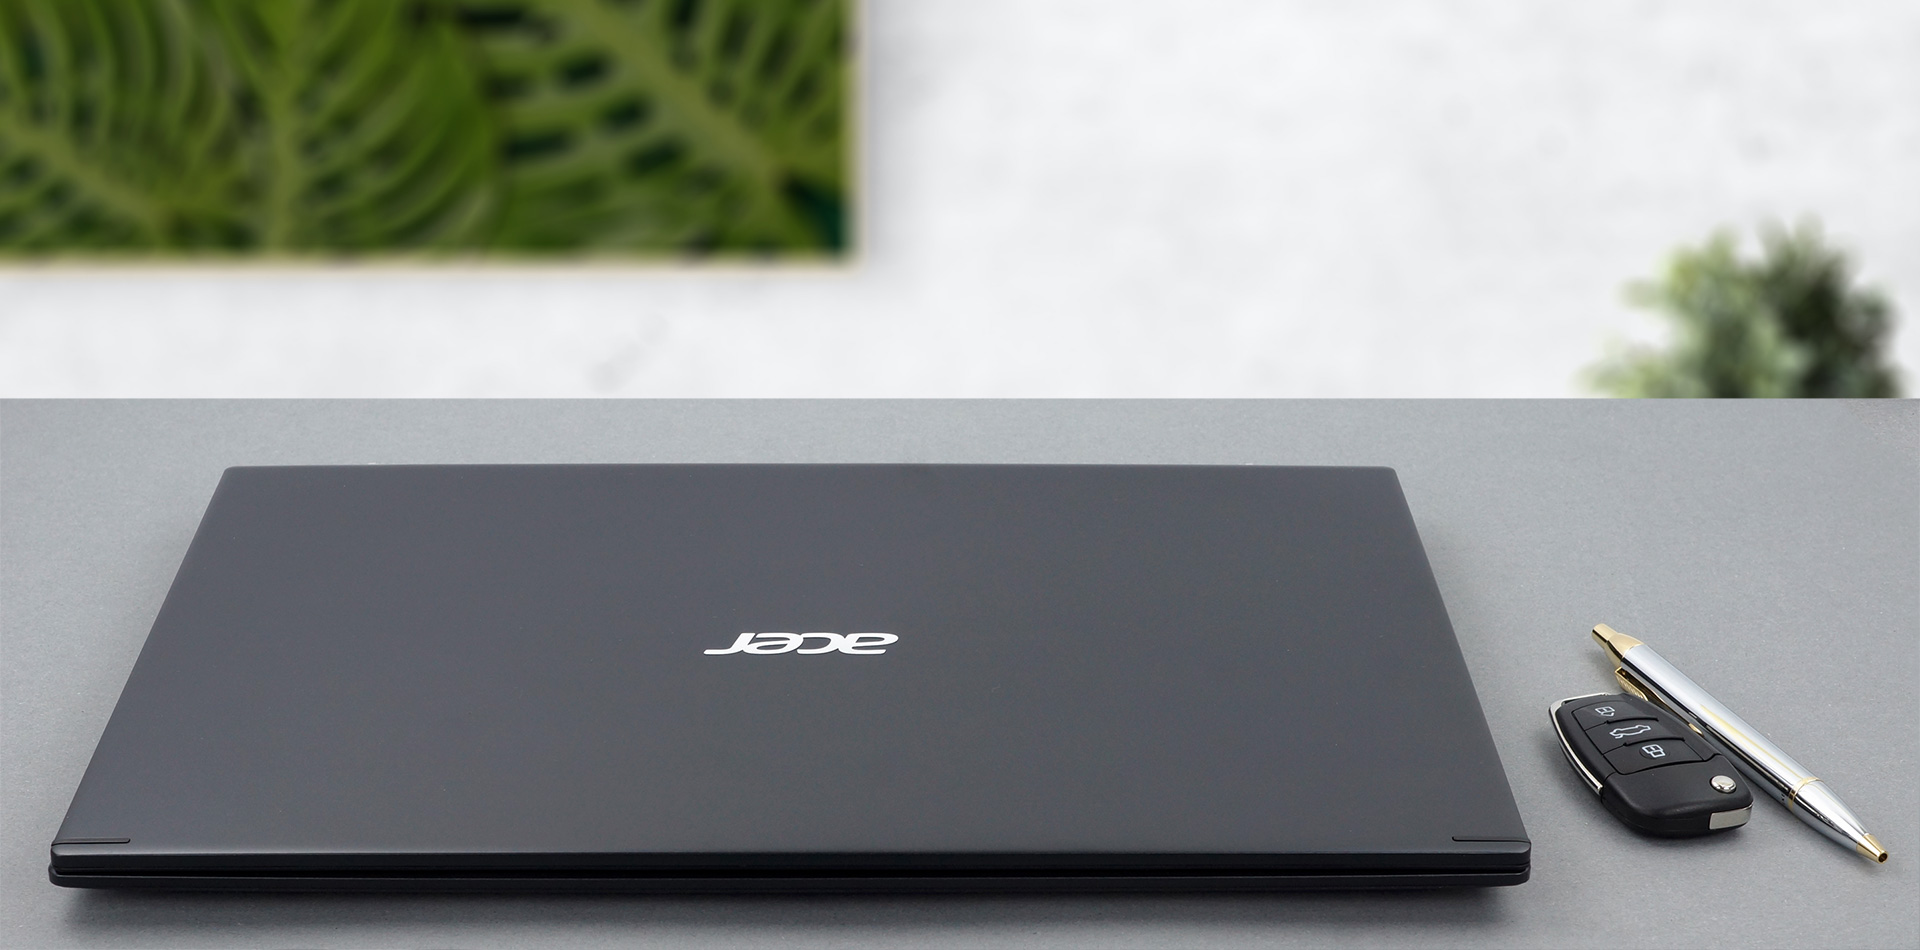 Top 5 reasons to BUY or NOT to buy the Acer Aspire 5 (A515-56G